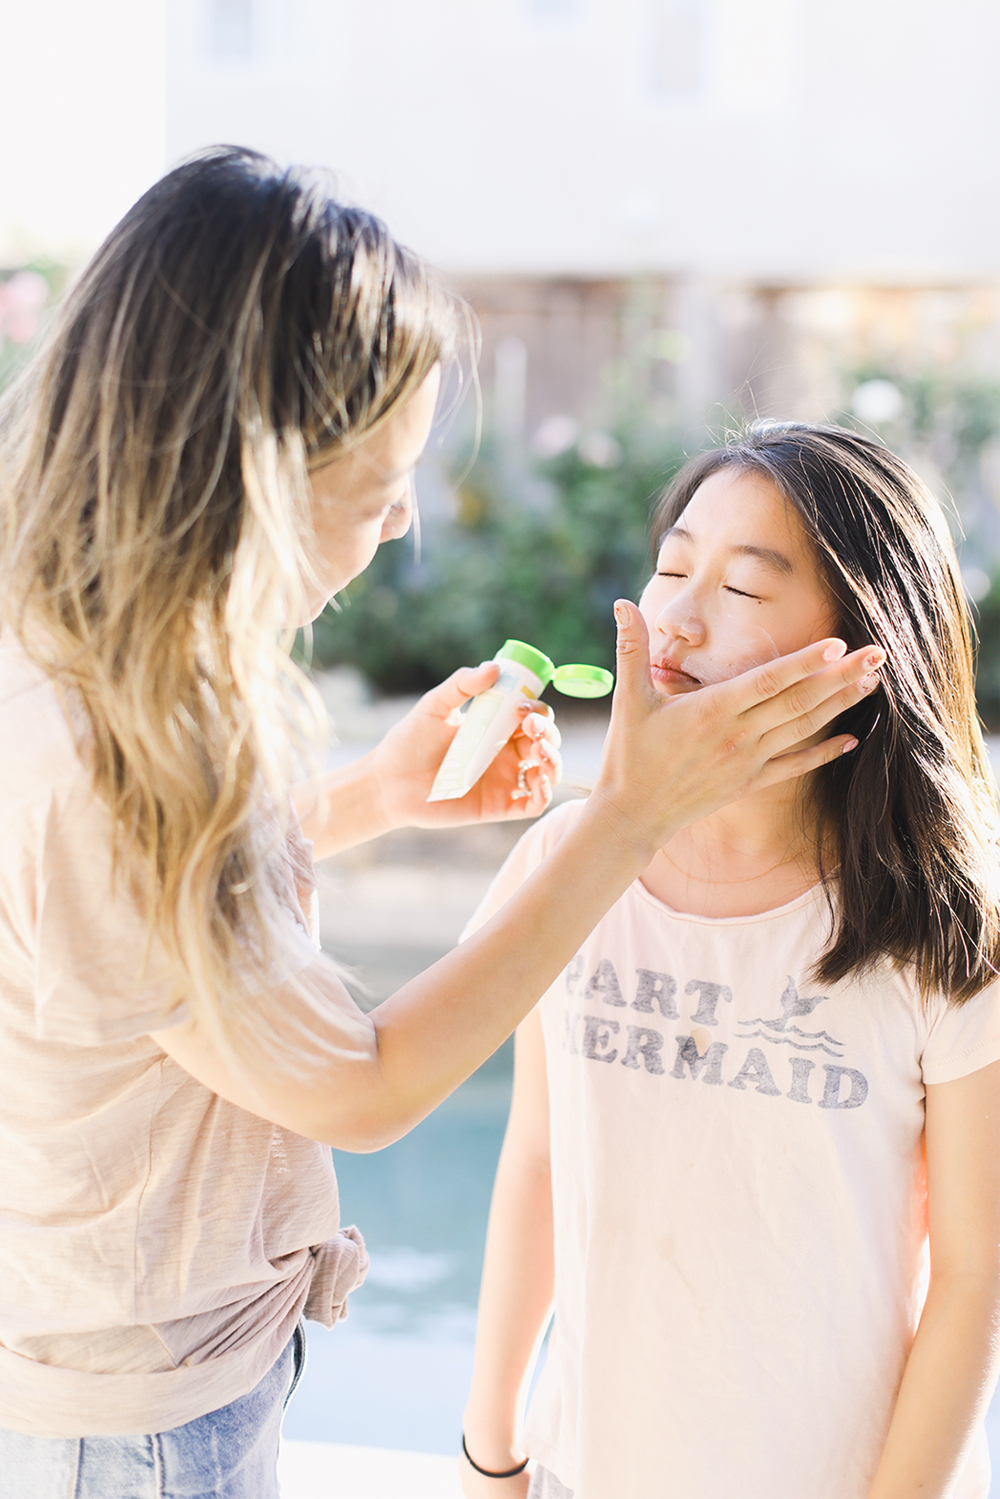 mom putting sunblock on daughter's face